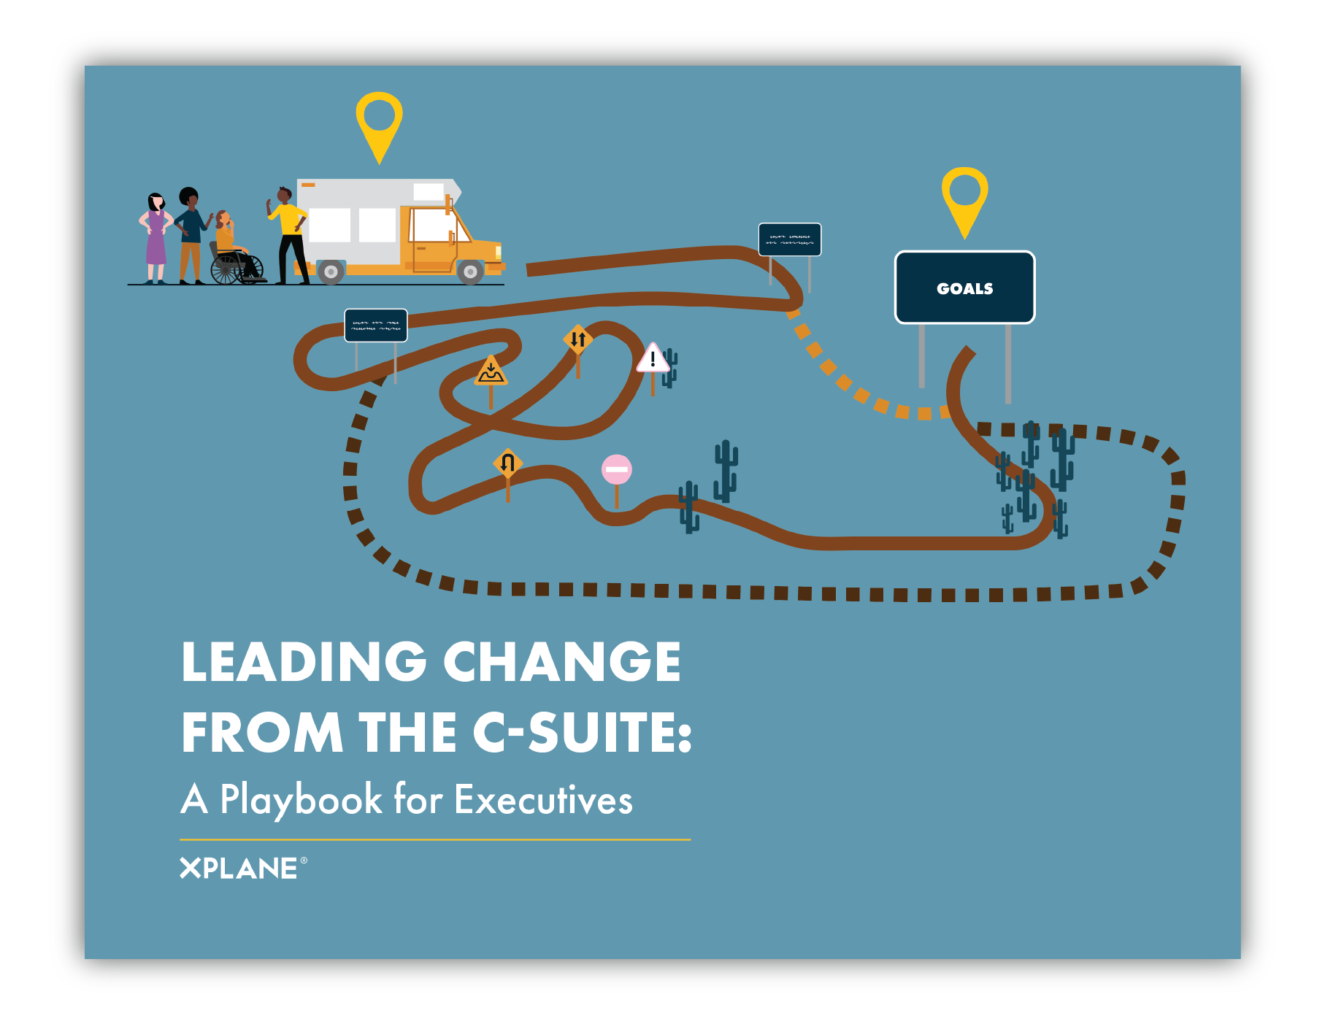 Cover of "Leading Change from the C-Suite" playbook